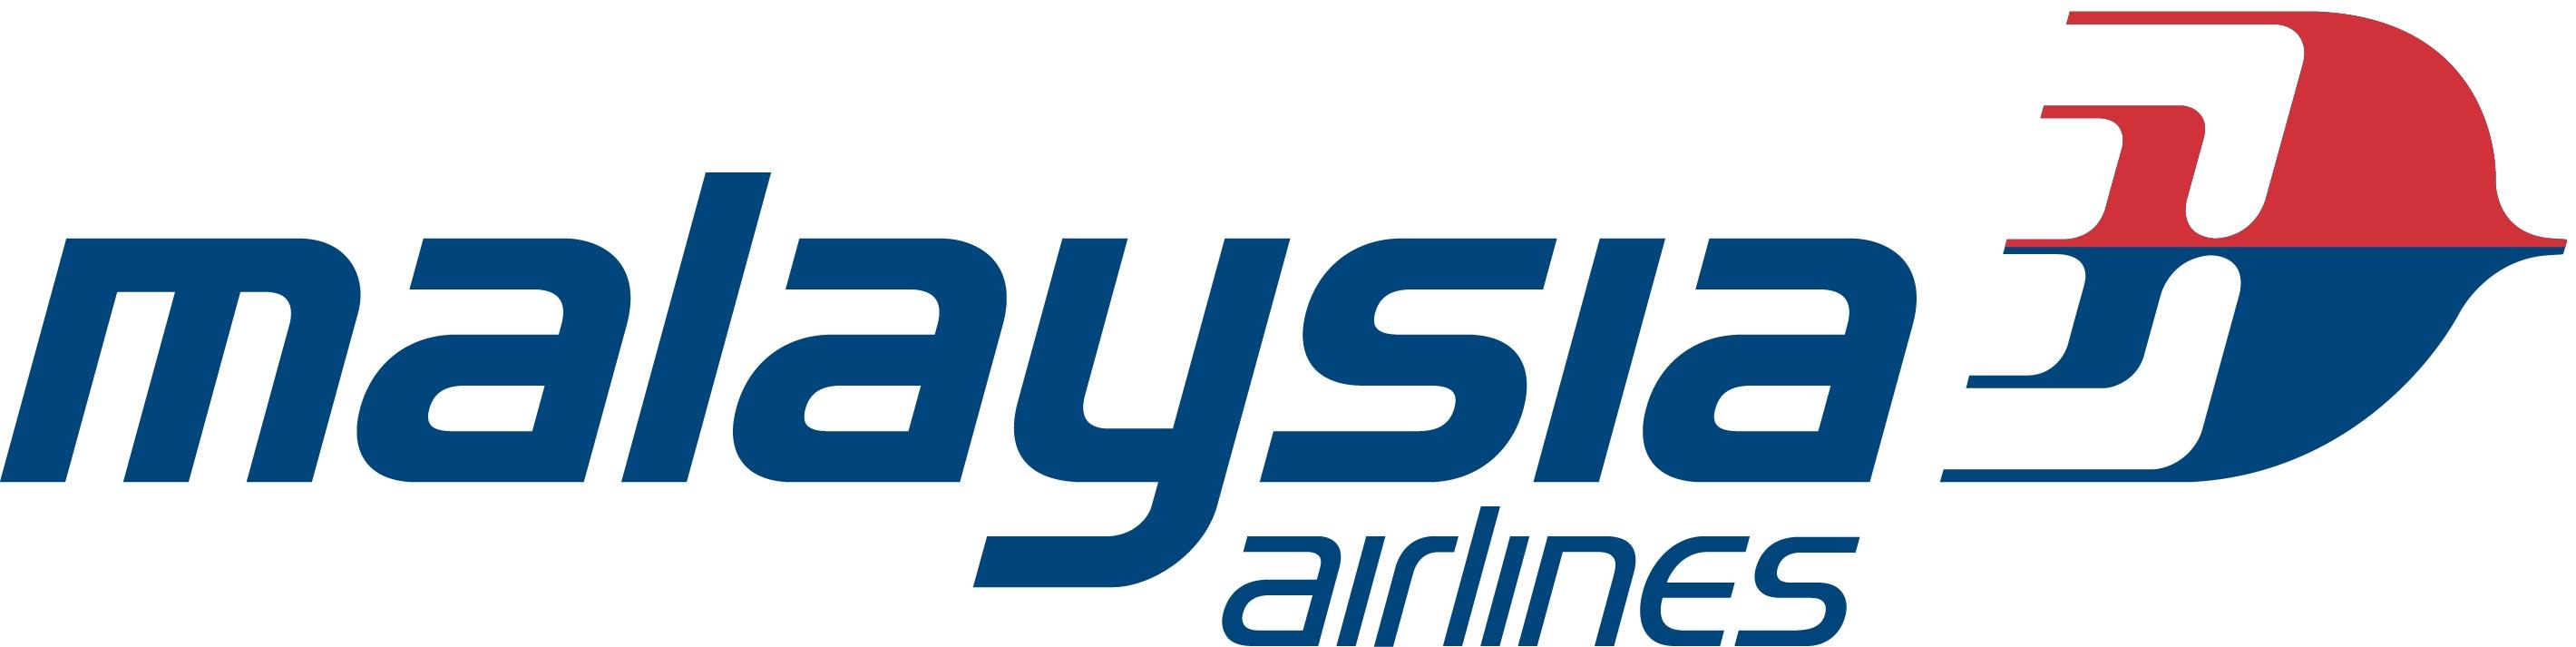 Airlines Logo - Malaysia Airlines Logo and Let's Fly